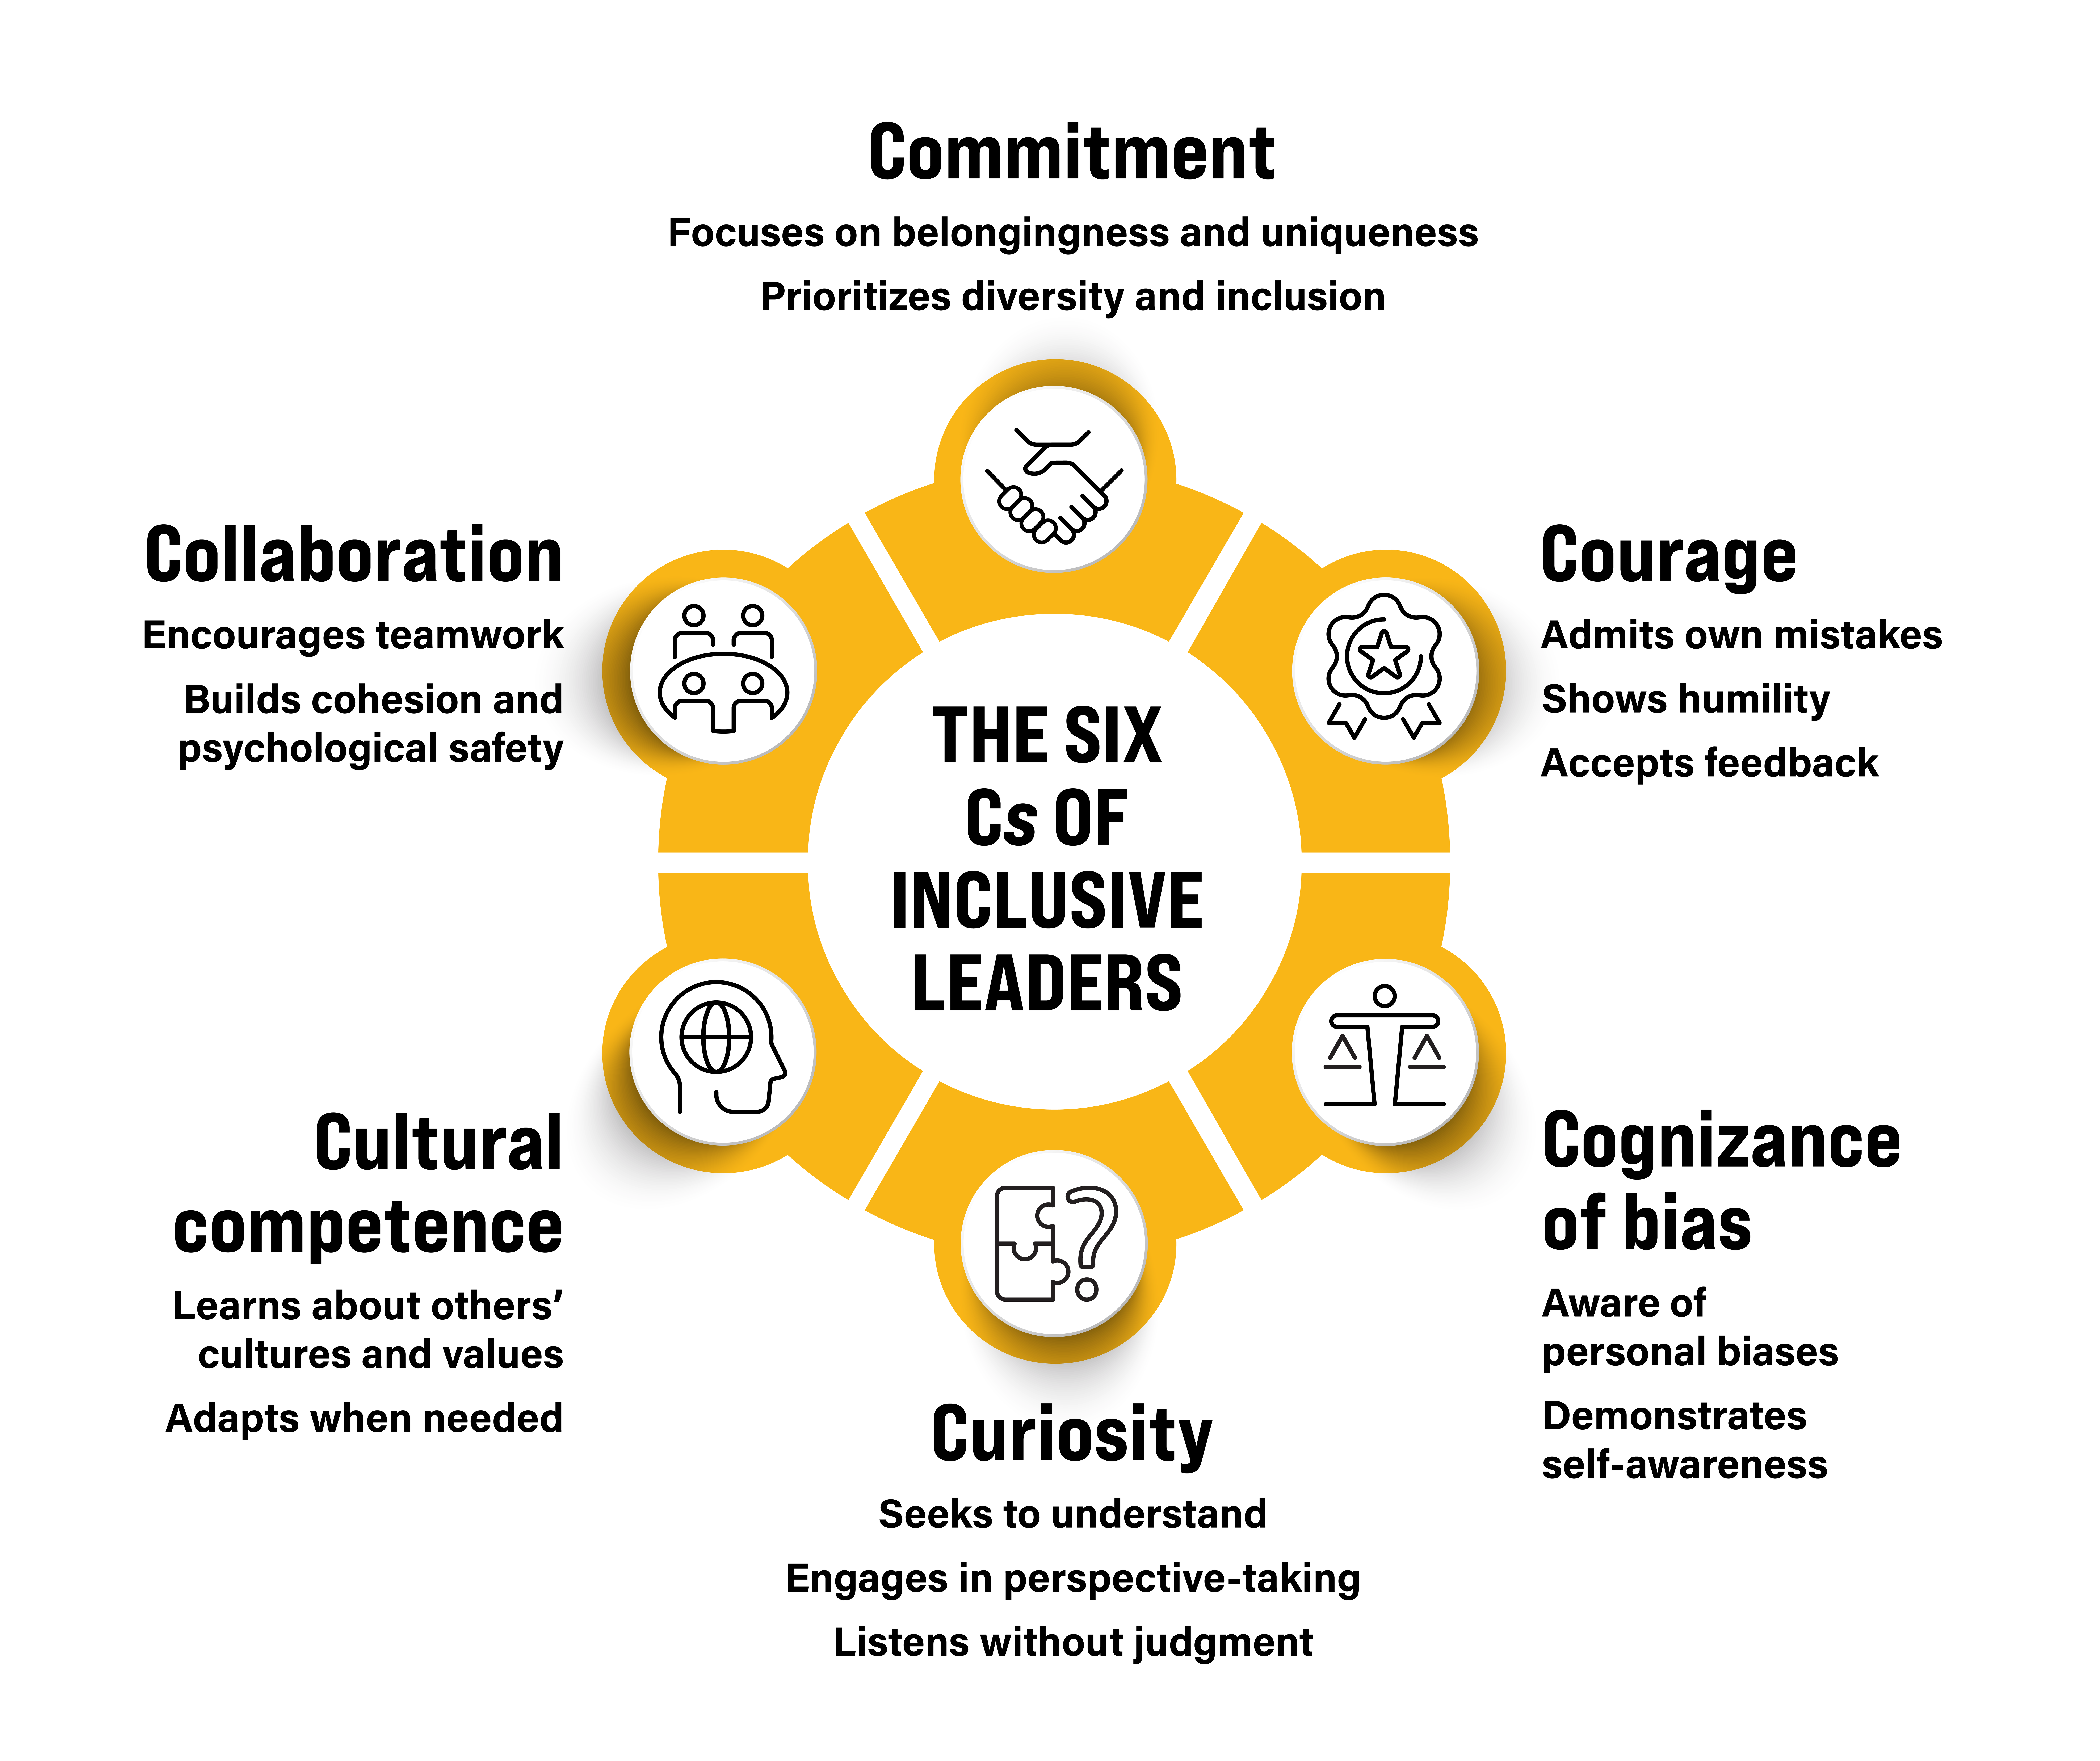 Graphic provides a visual representation of the 6 C’s from the article text: Commitment, courage, cognizance of bias, curiosity, cultural competence, and collaboration.